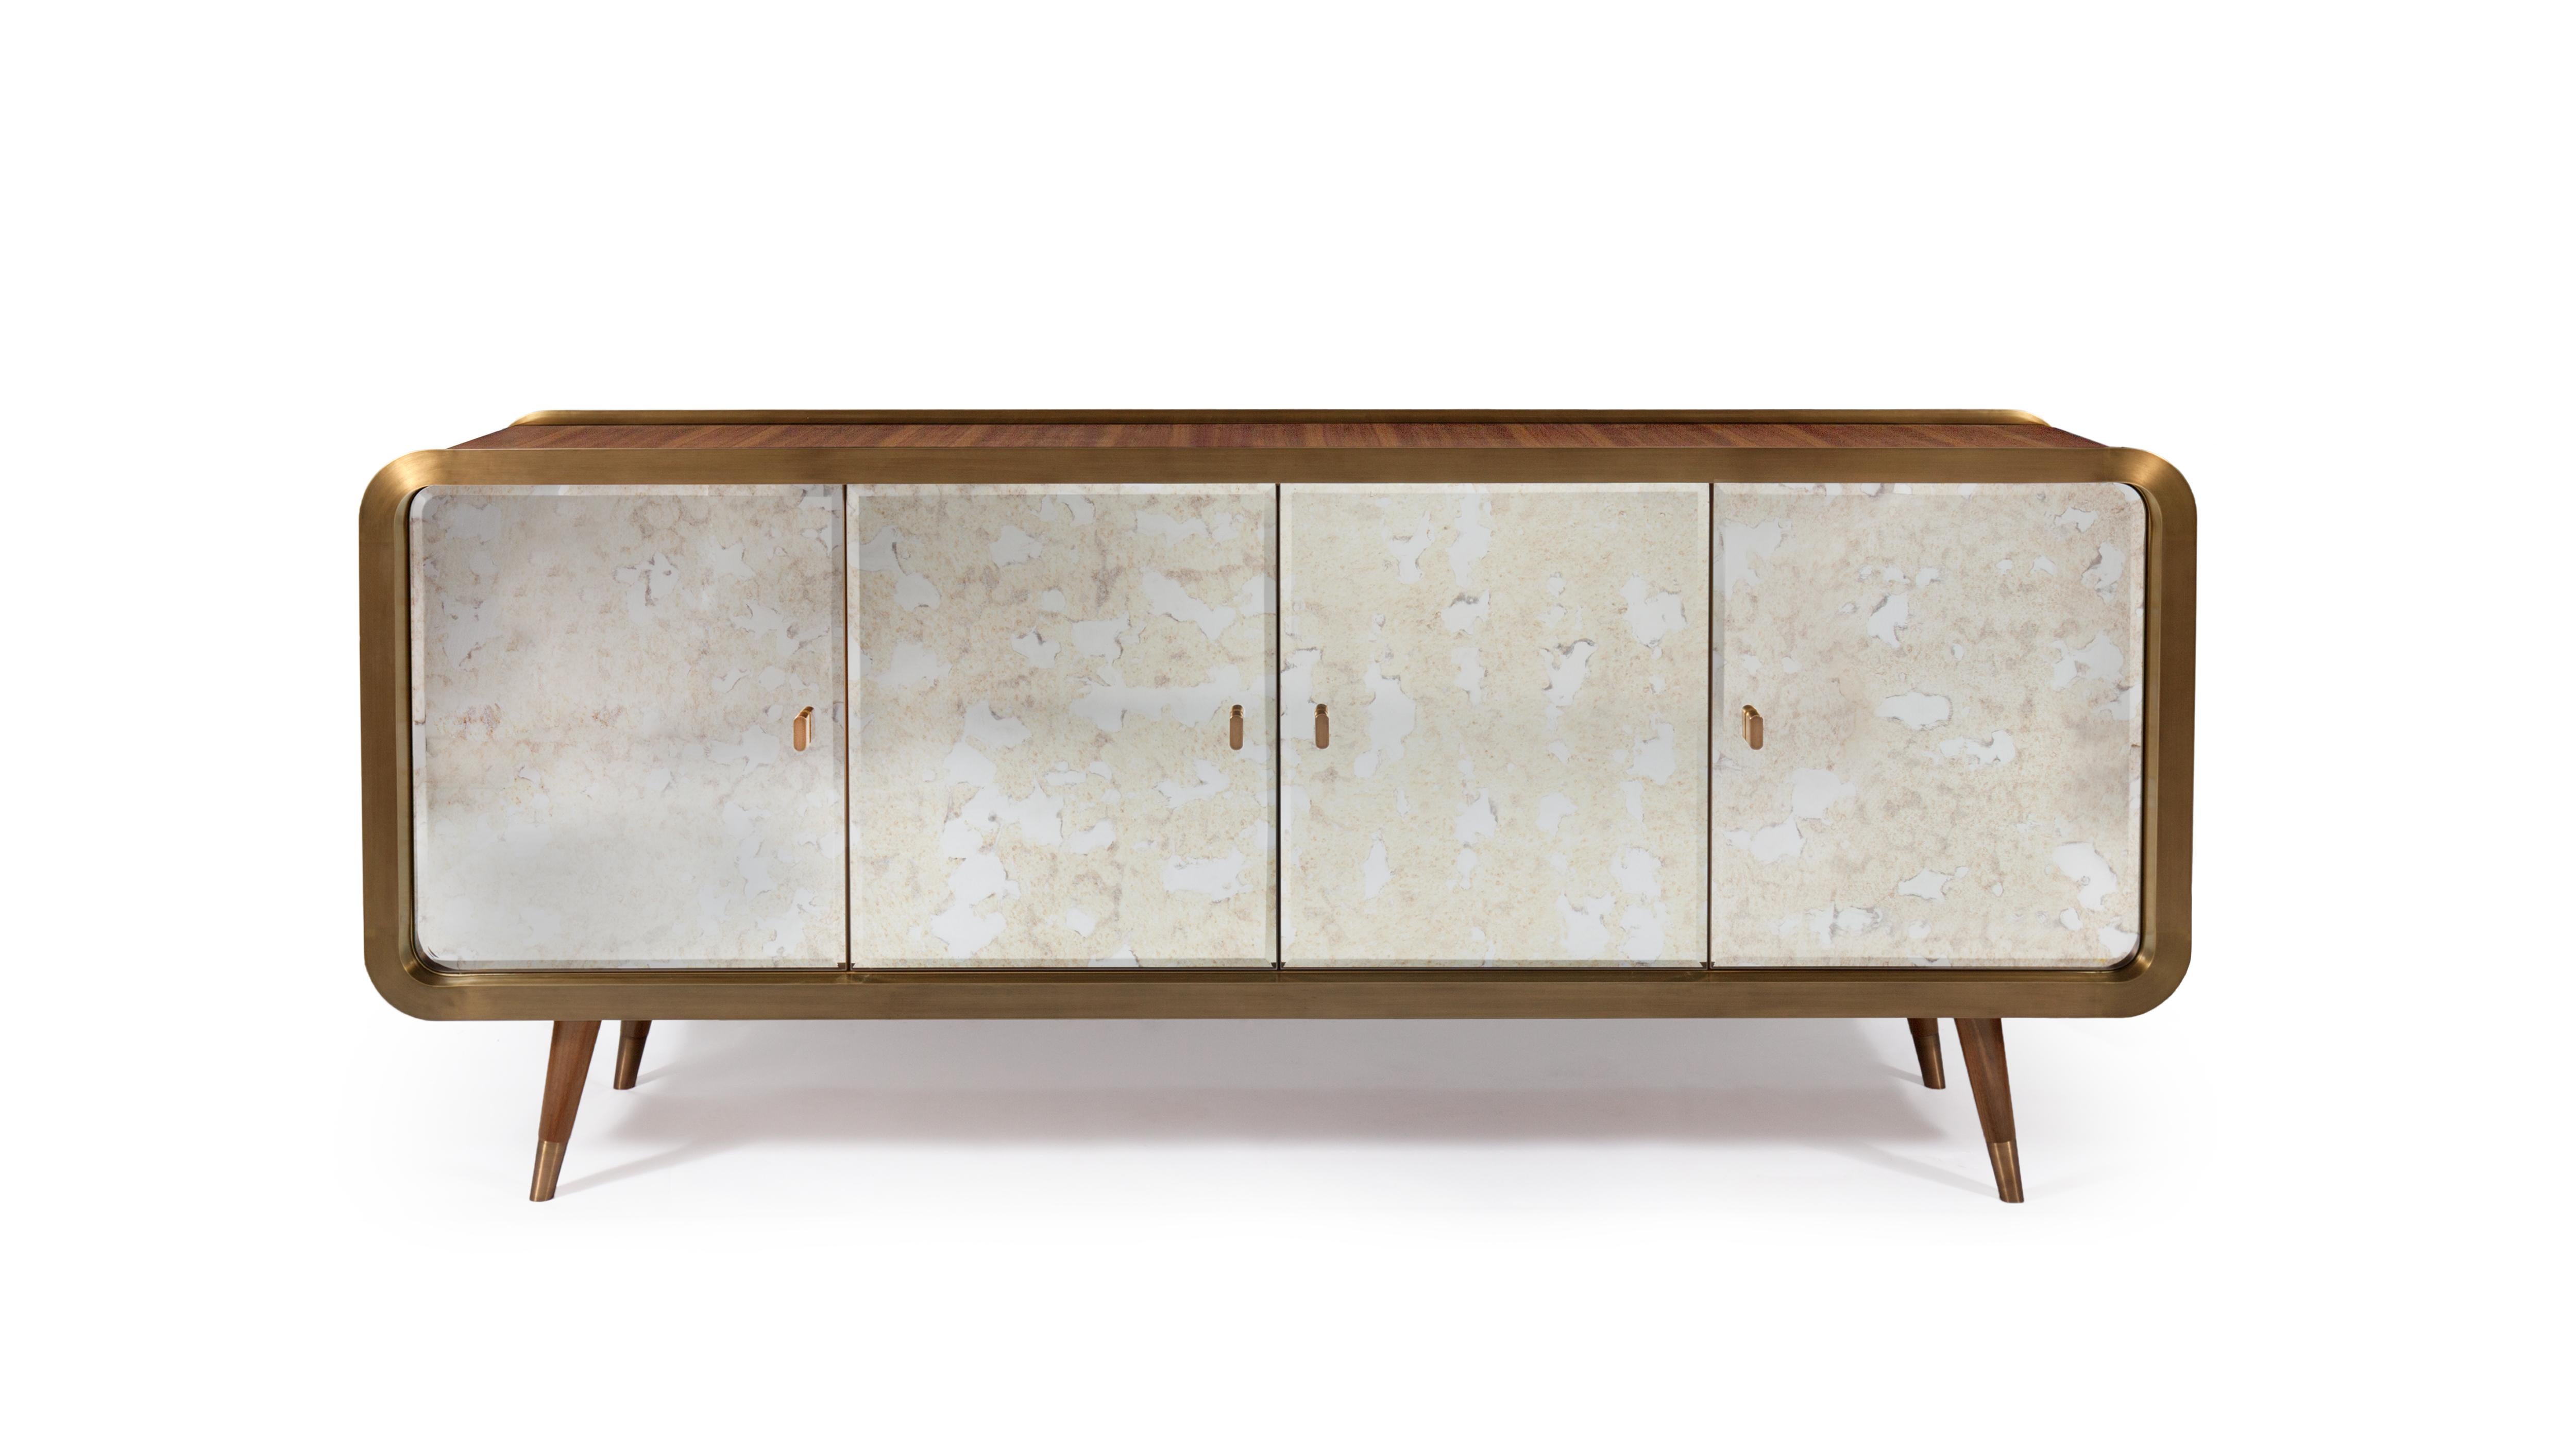 Unveil Sideboard 200 by InsidherLand
Dimensions: D 50 x W 200 x H 85 cm.
Materials: 
Wooden structure: walnut veneer and interior in sycamore veneer. Doors: aged mirror. Shelves: bronze glass. Metal frame, handles and feet: brushed bronzed brass in